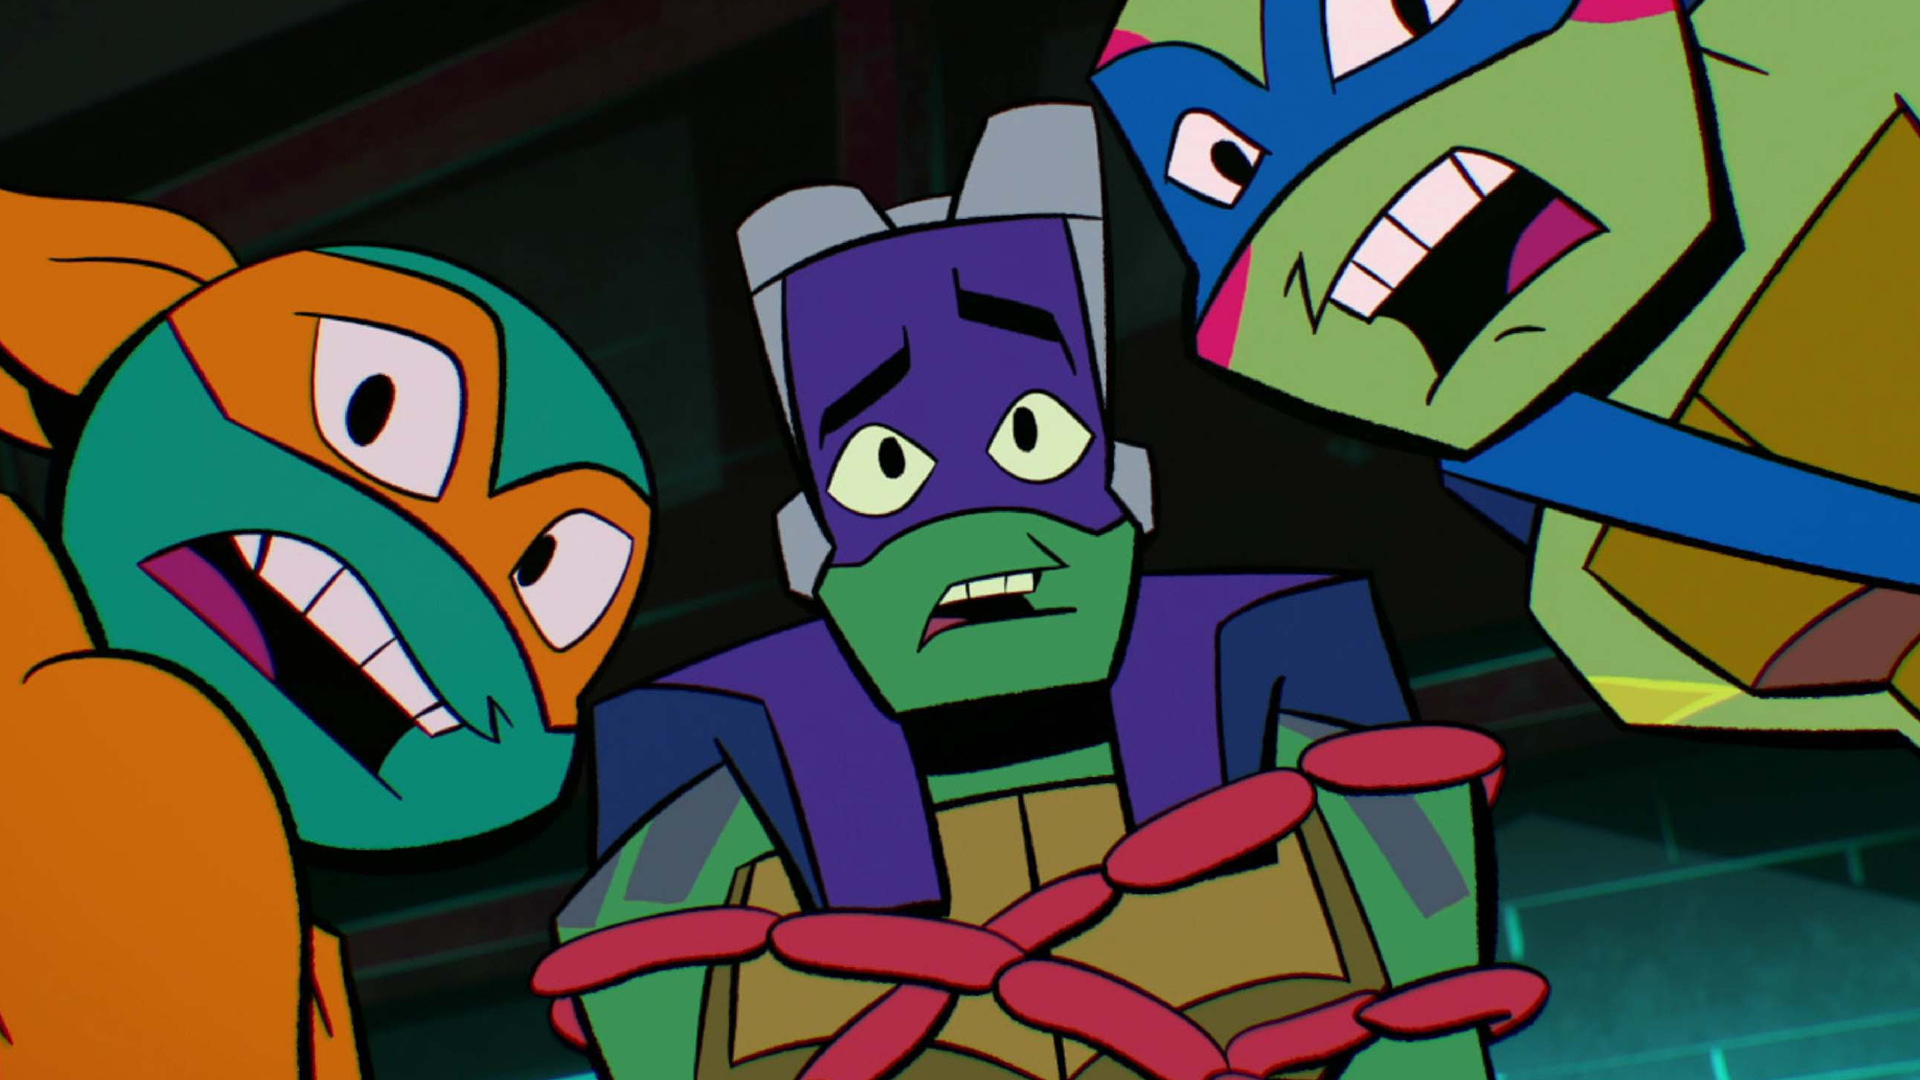 Watch Rise of the Teenage Mutant Ninja Turtles Season 1 Episode 5: Origami  Tsunami/Donnie's Gifts - Full show on Paramount Plus